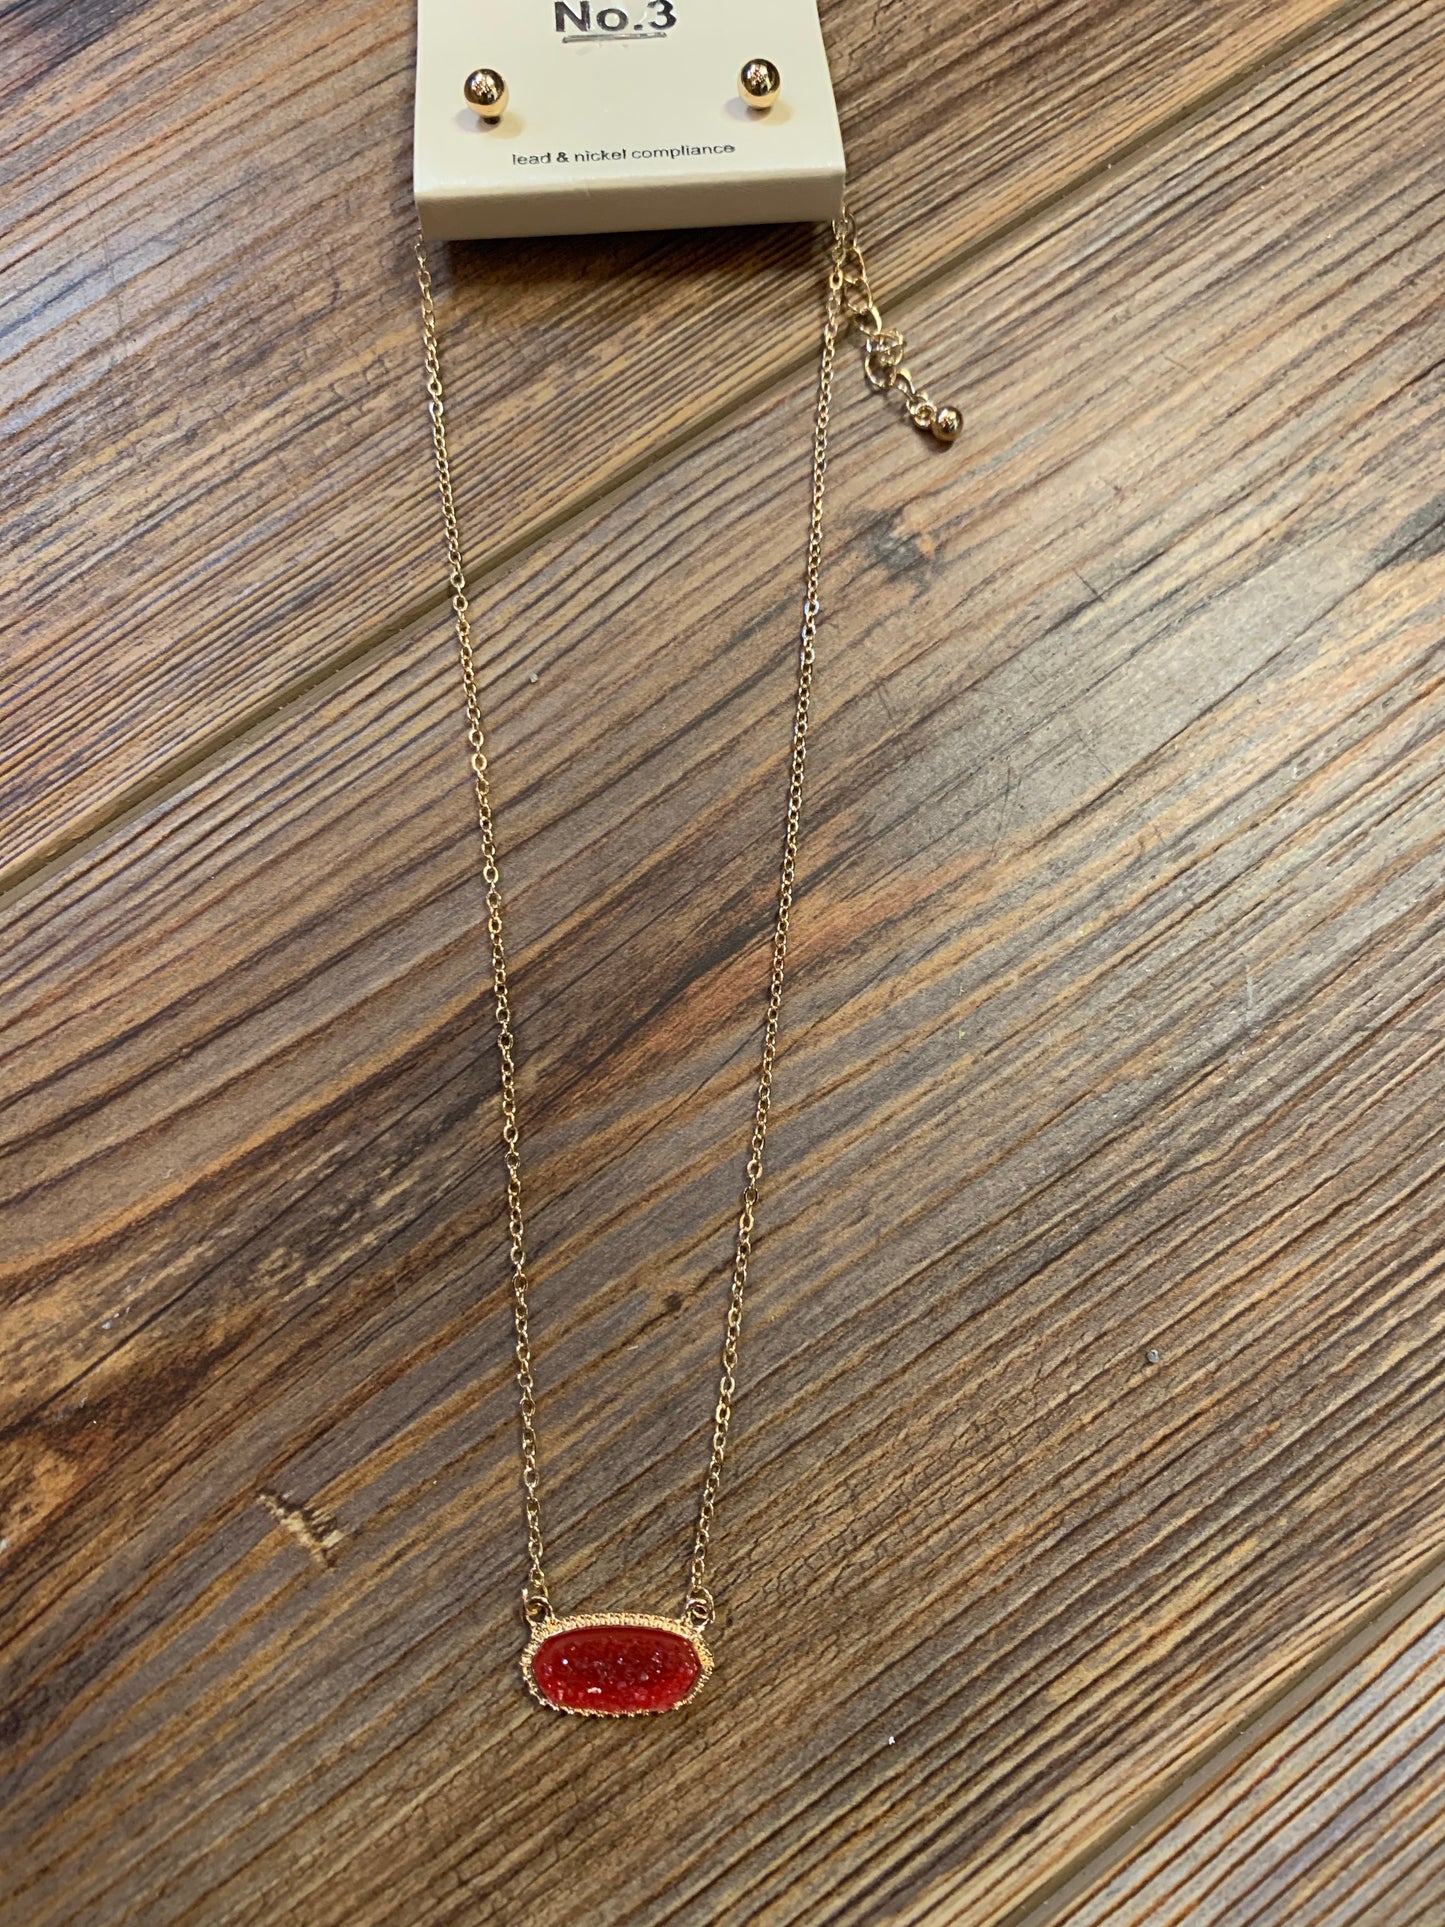 Dainty Oval Druzy Pendant Necklace & Earrings Set - Red on Gold